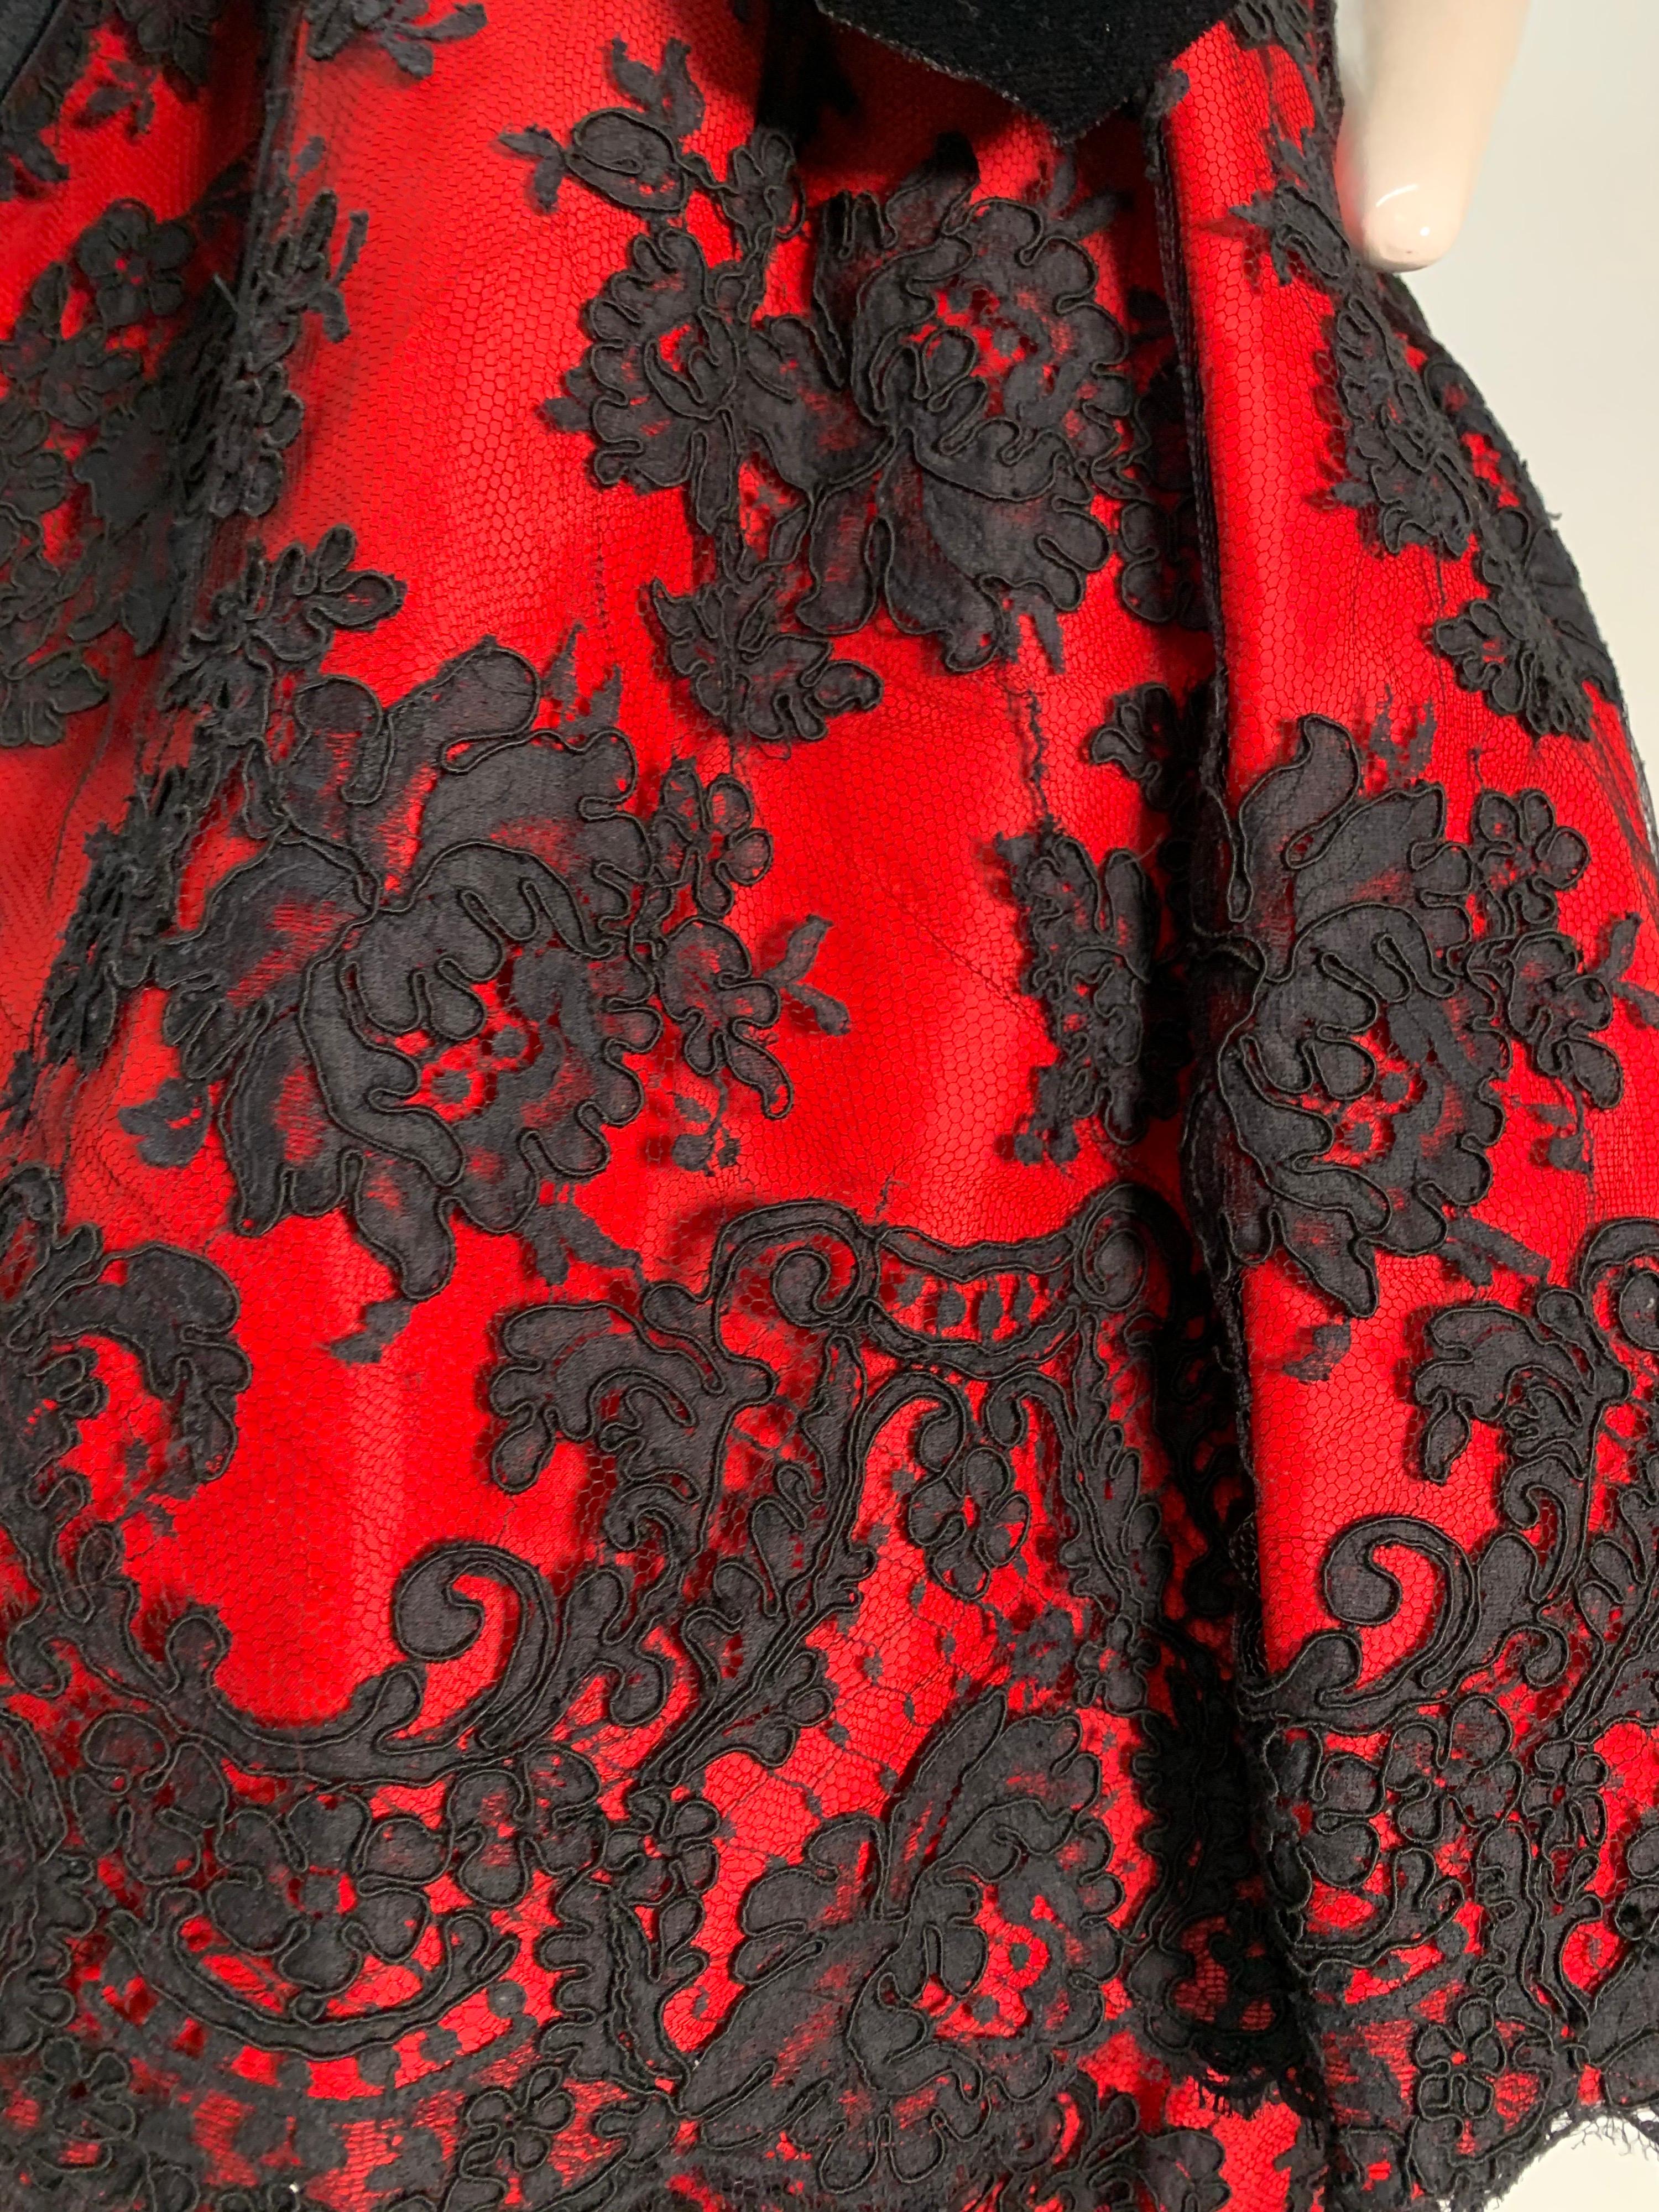 1980 Pauline Trigere Red Silk Taffeta & Black Lace Overlay Cocktail Dress  For Sale 5